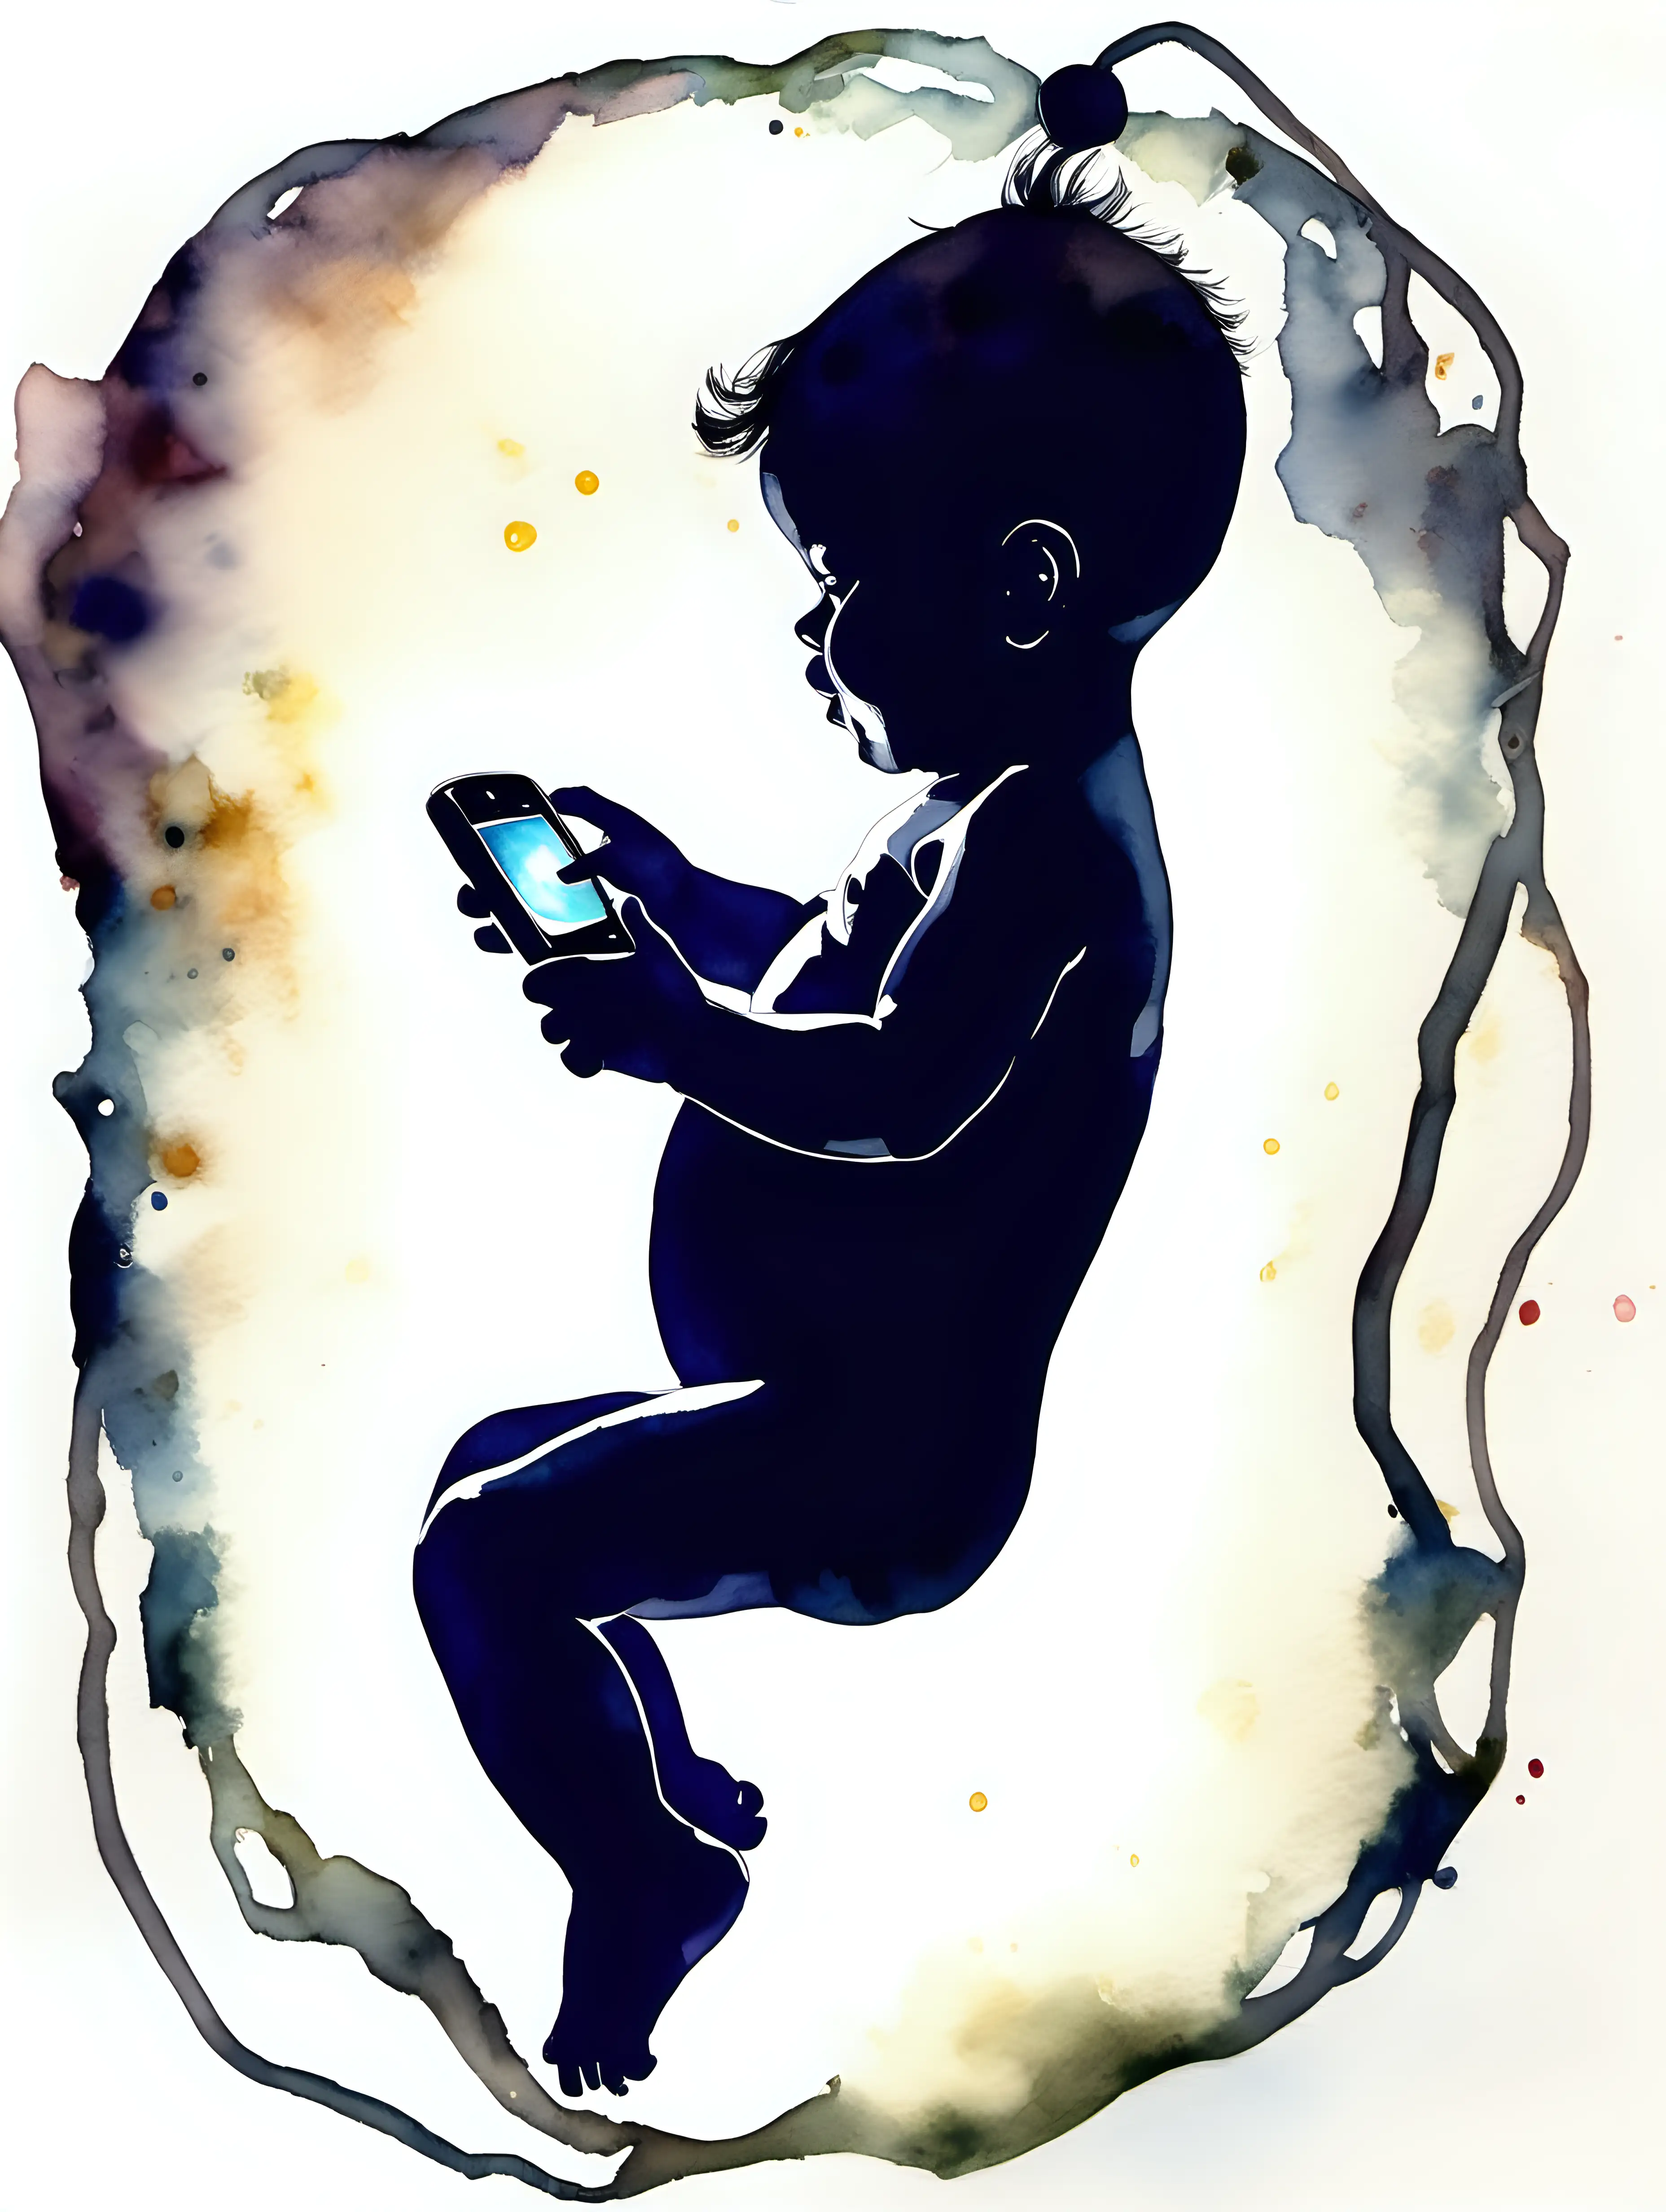 Silhouette of Baby Playing Video Game in Womb with Umbilical Cord Nursery Watercolor Art